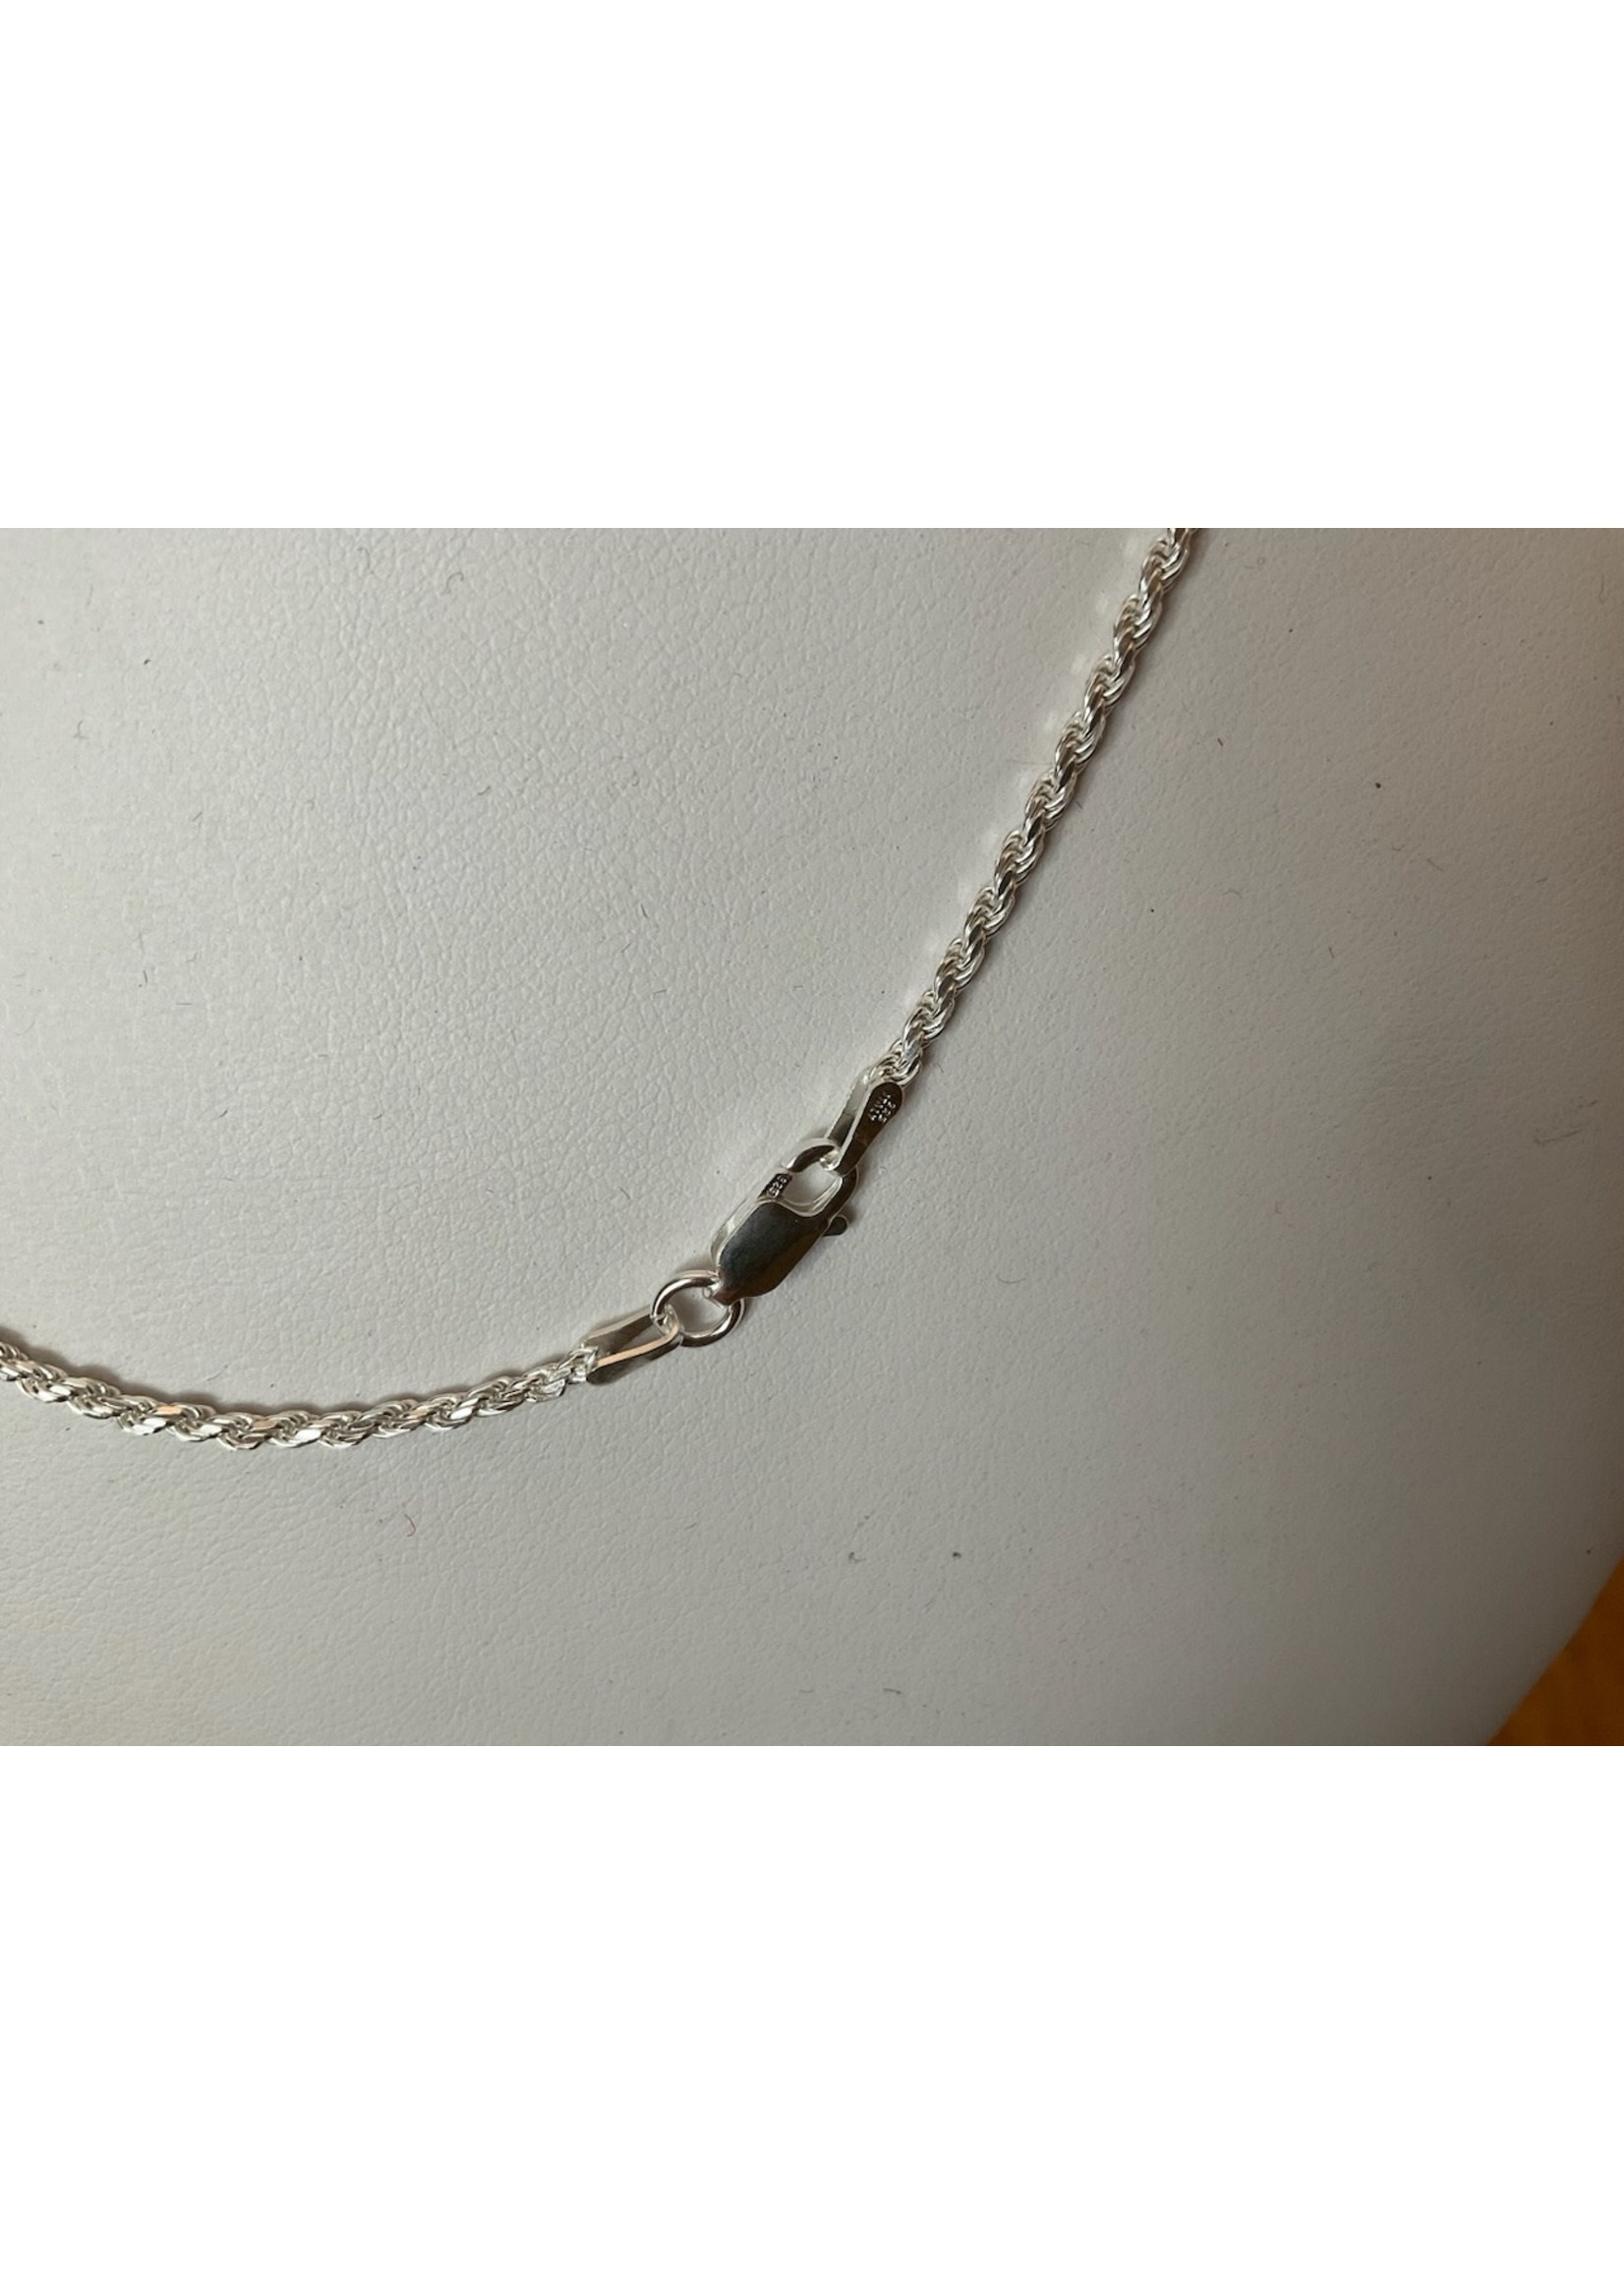 Rope Chain - Sterling Silver with Lobster Clasp - 16”